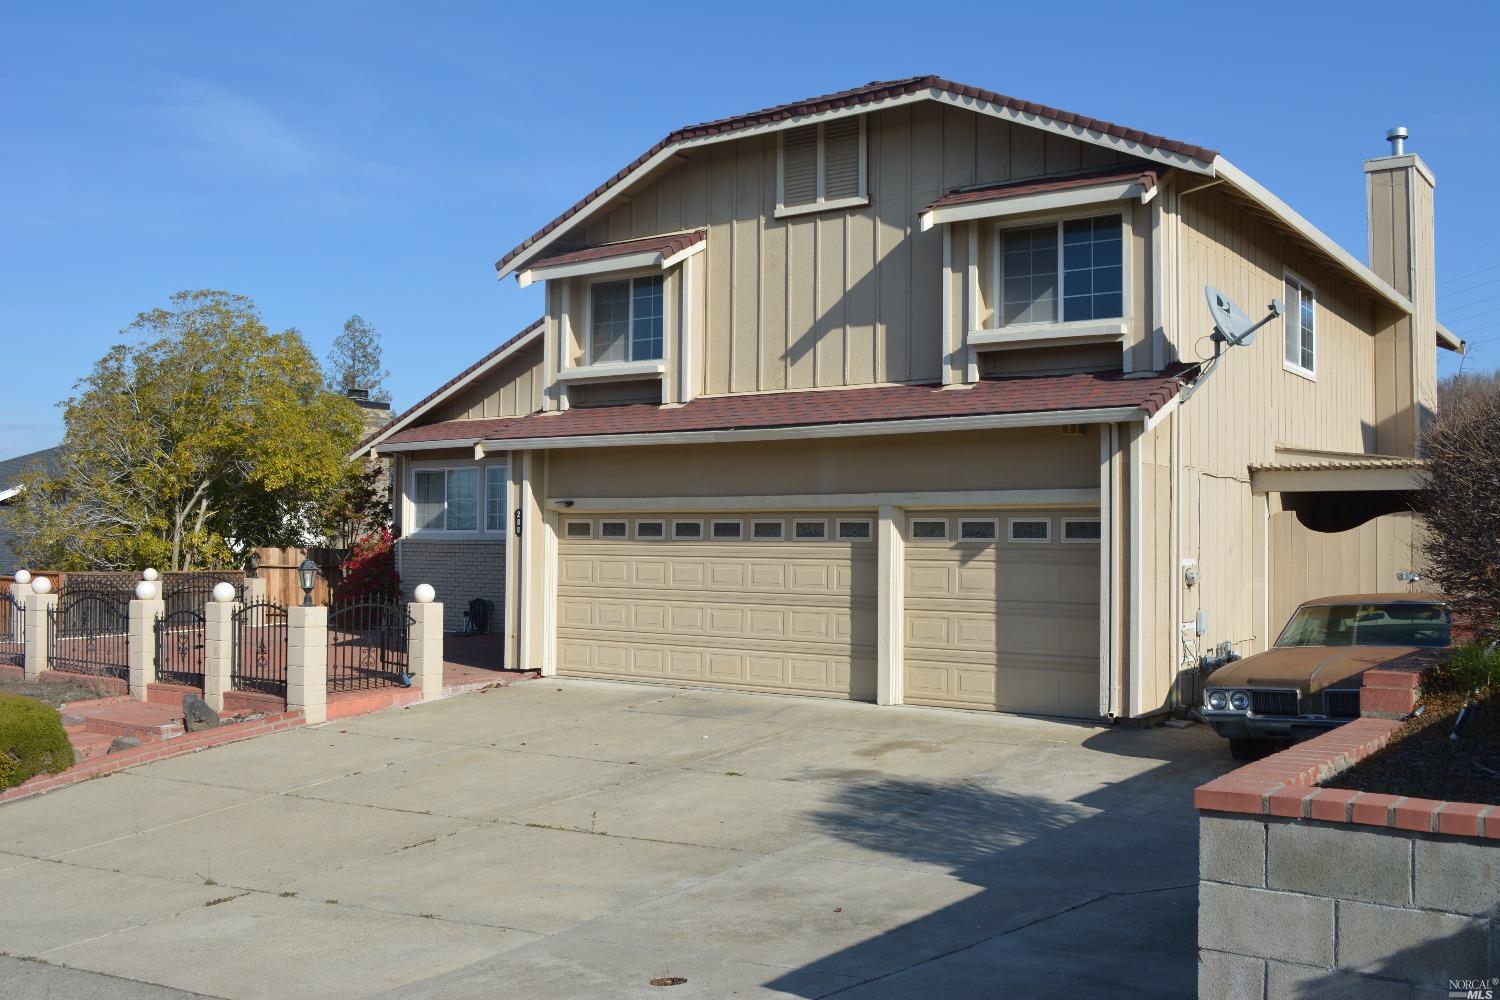 Desirable Hunter Ranch neighborhood of East Vallejo. This impressive home features a light and brigh